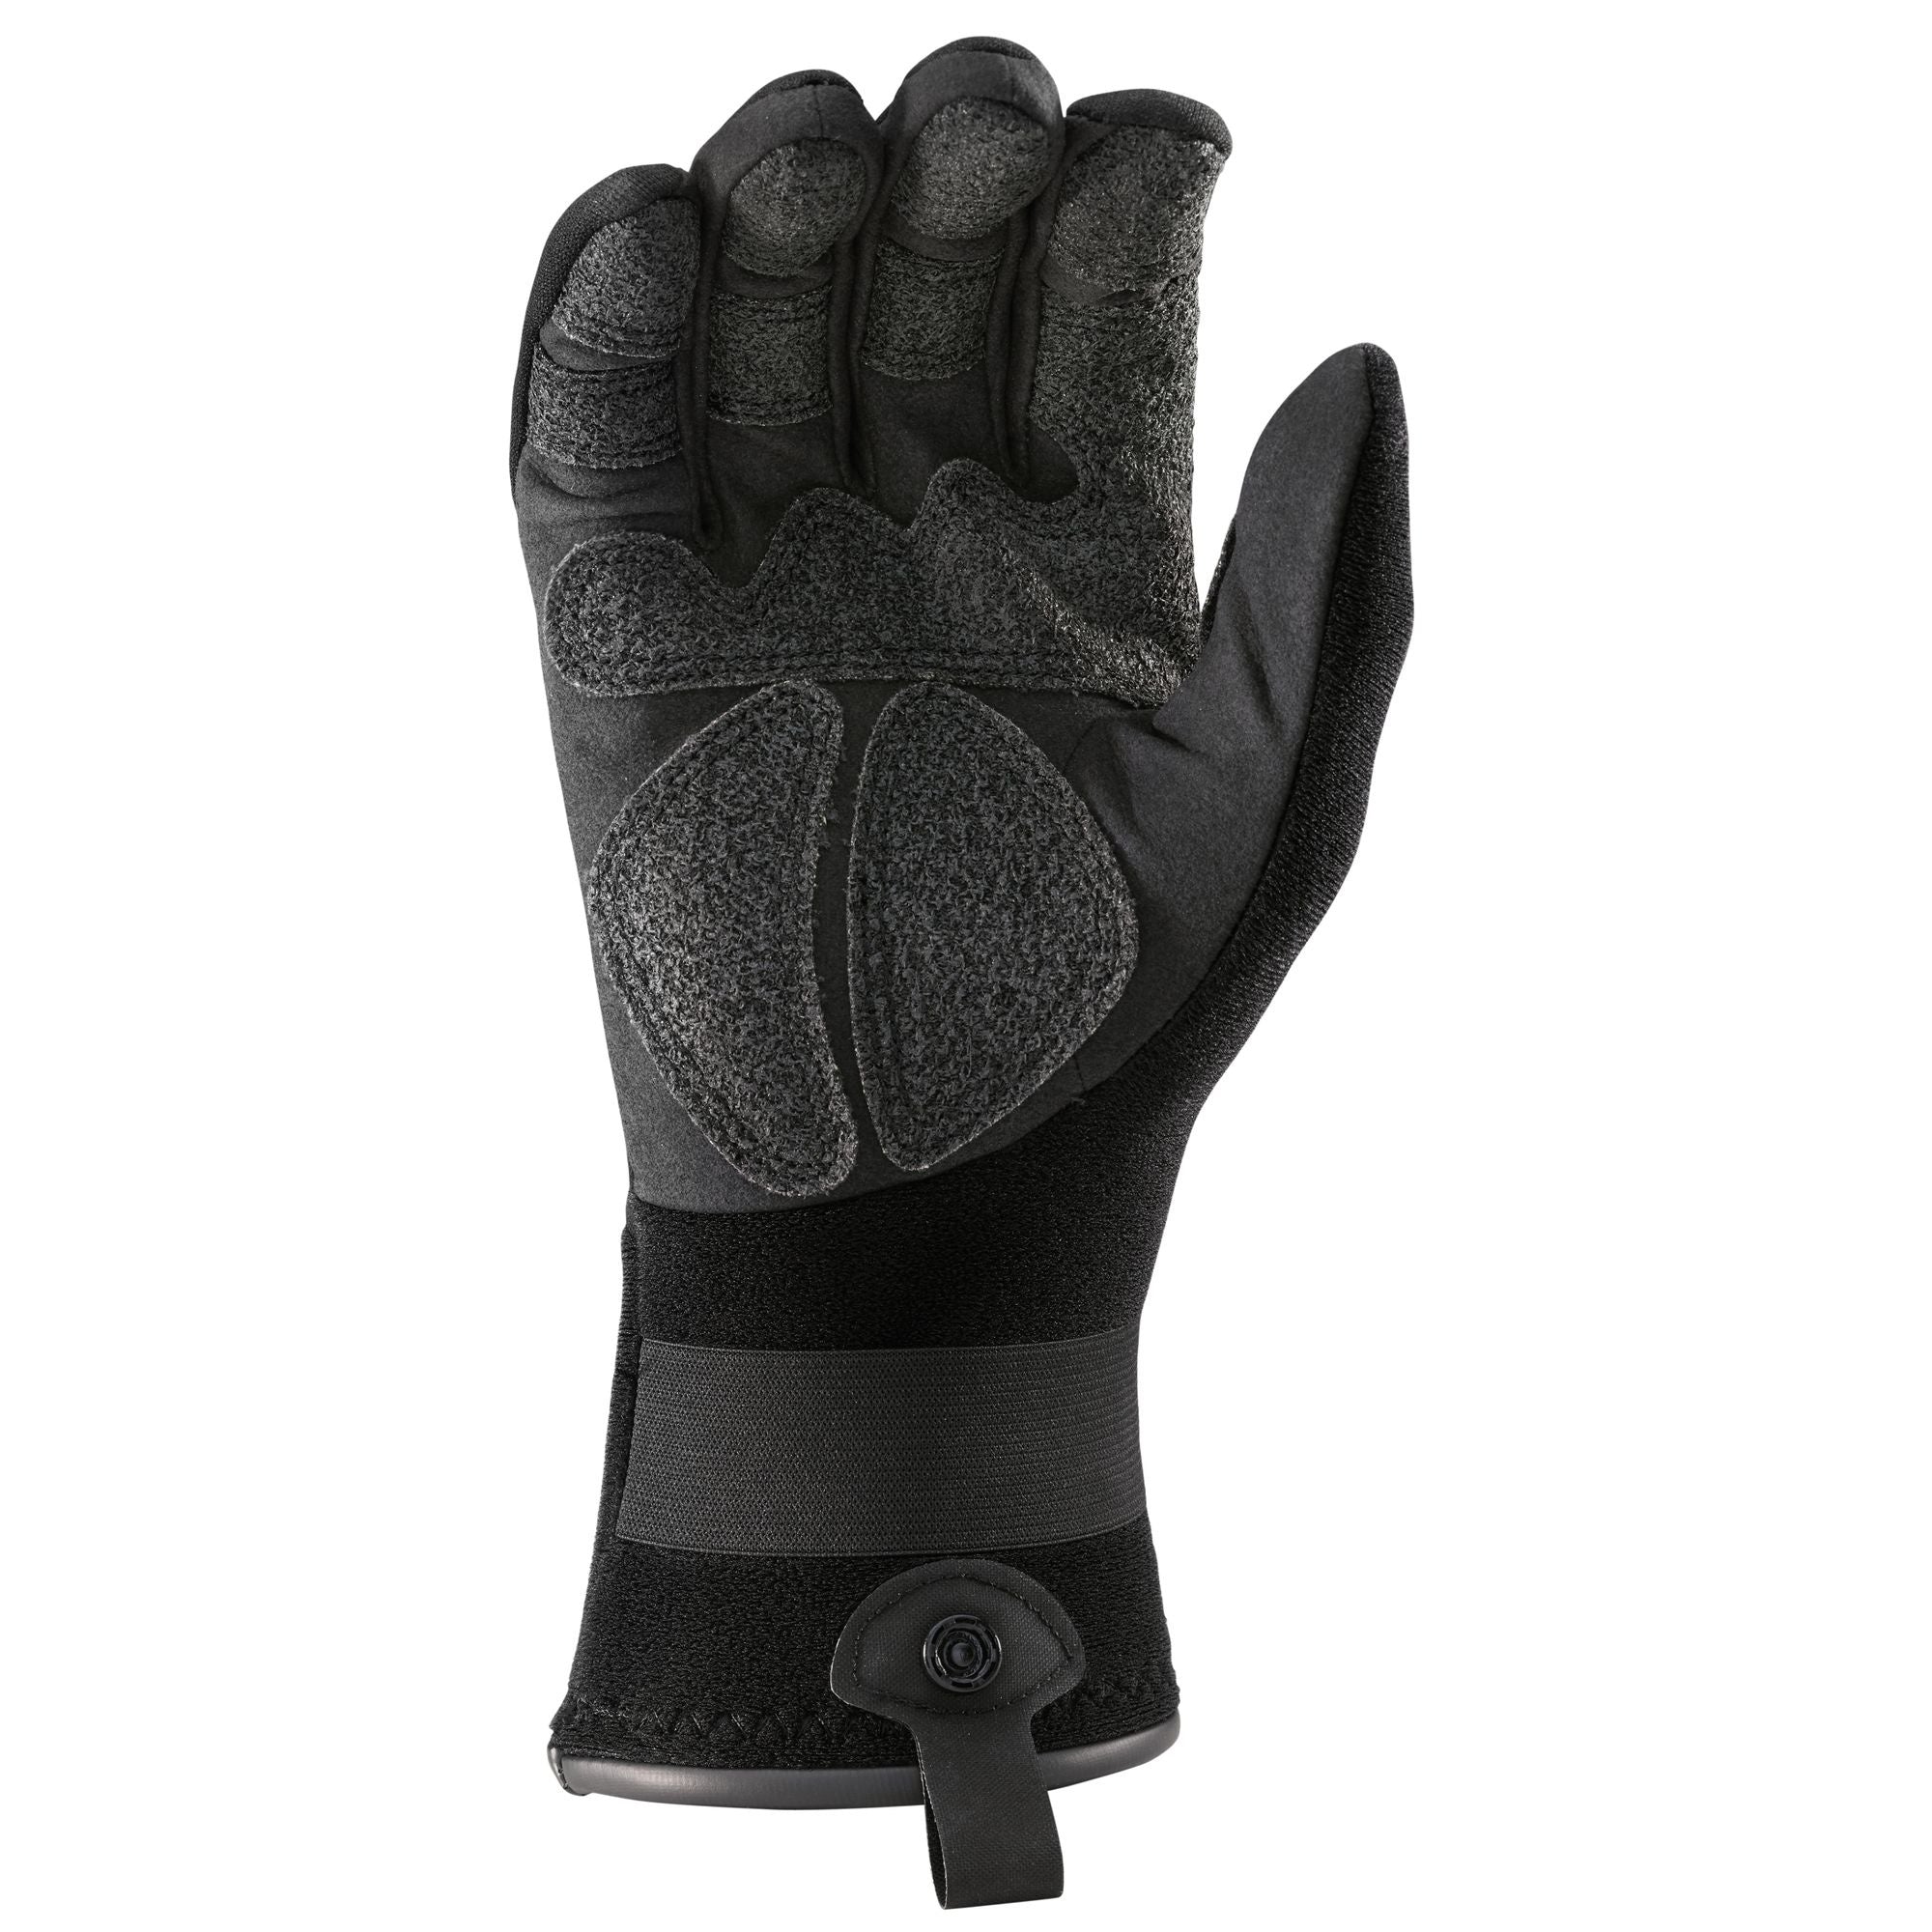 NRS - Tactical Gloves (Past Season)